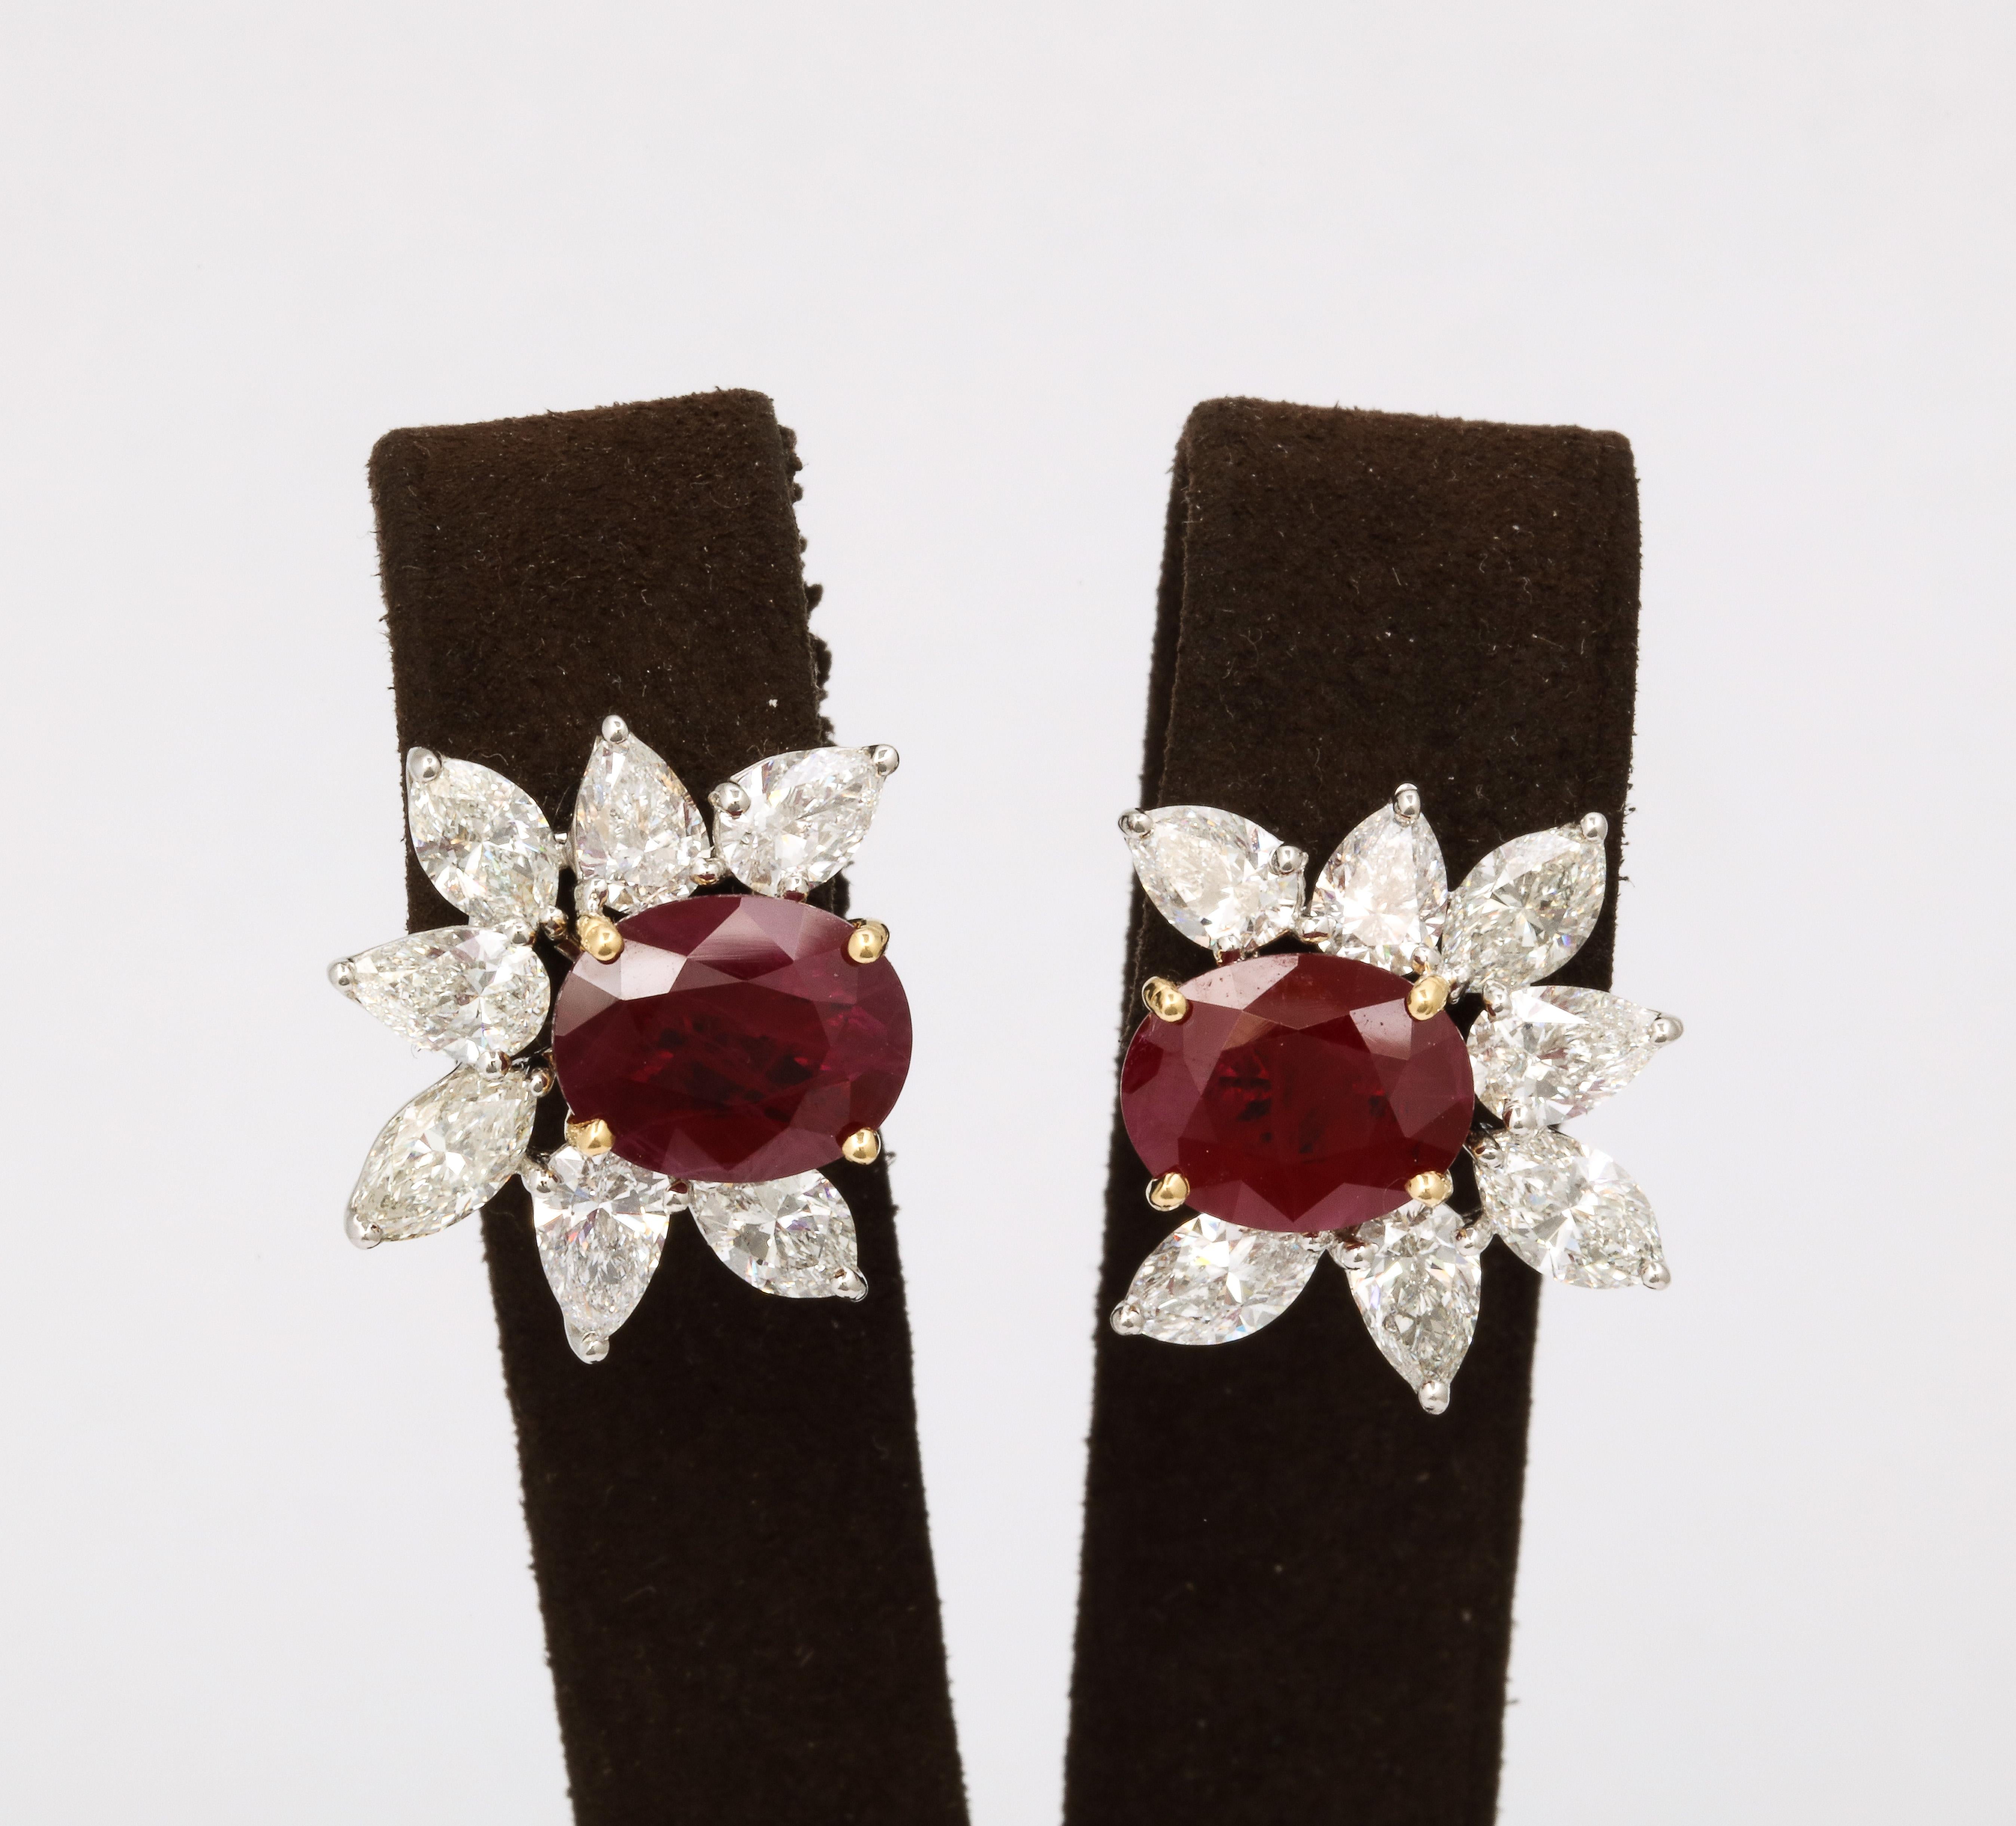 
A stunning pair of rare Burma Ruby earrings. 

9.45 carats of Certified INTENSE RED Oval Burma Ruby. 

7.72 carats of white pear and marquise shaped diamonds. 

Set in platinum and 18k yellow gold. 

Certified by Christian Dunaigre of Switzerland.